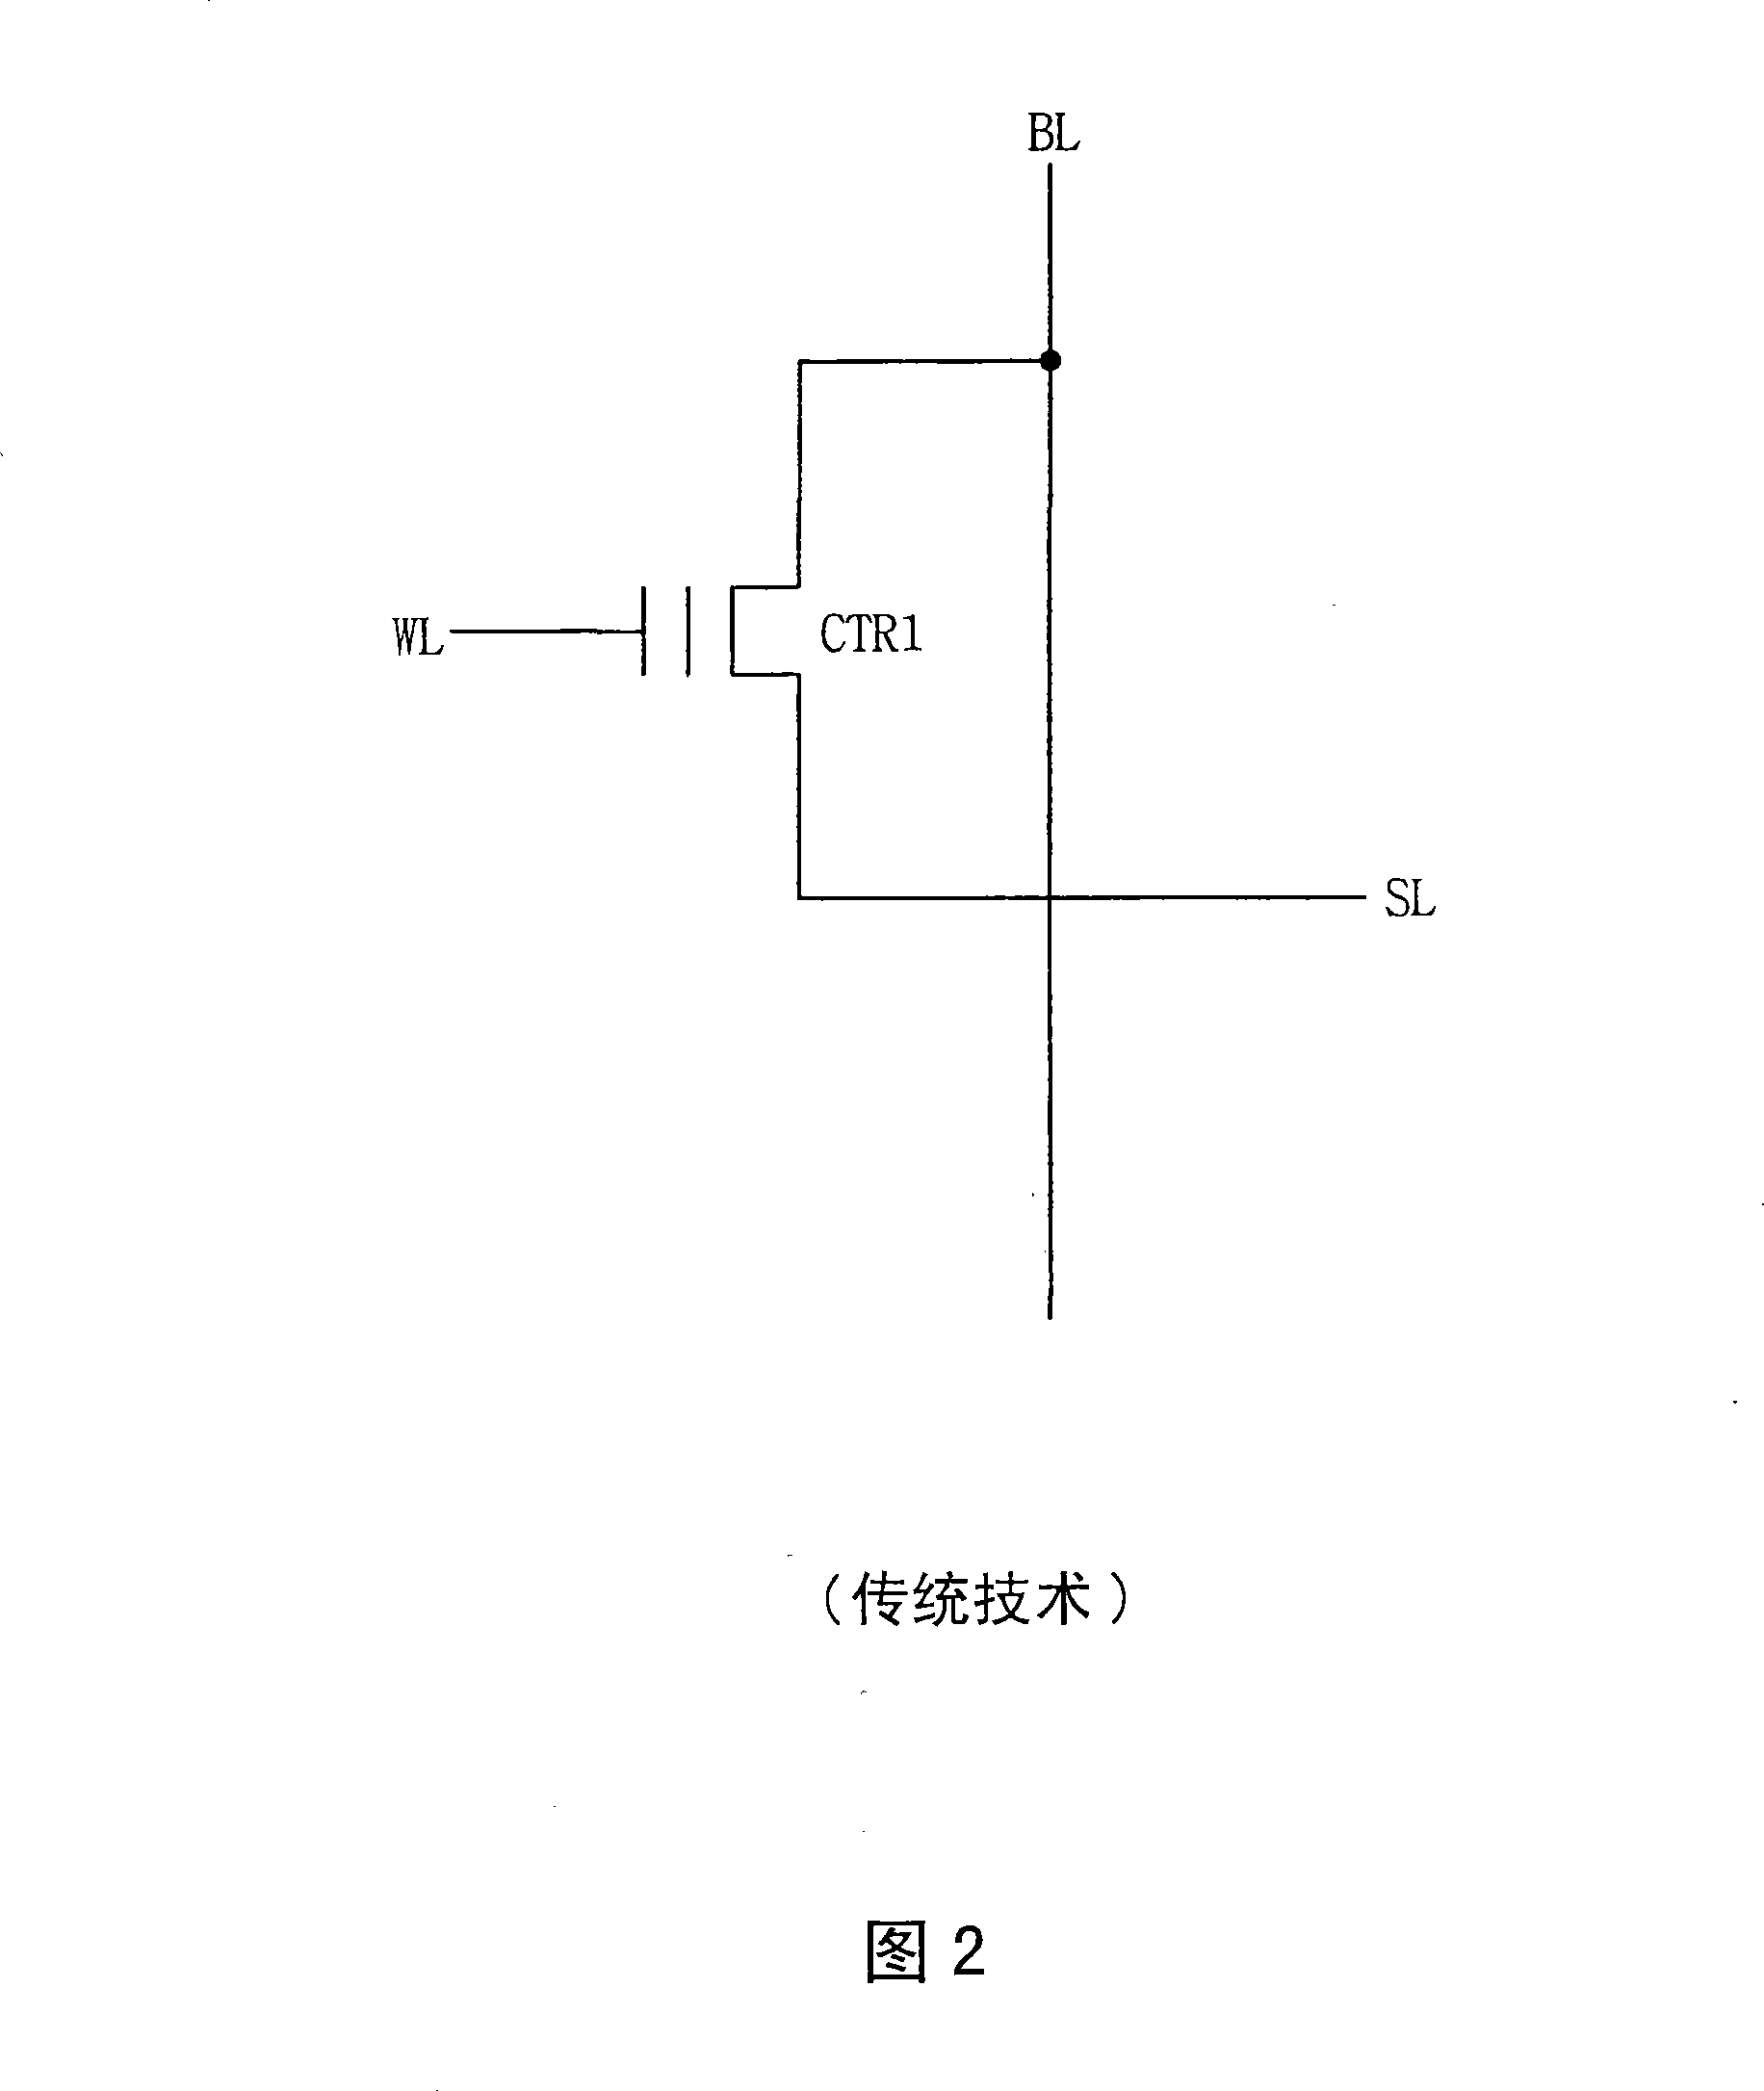 Decoders and decoding methods for nonvolatile memory devices using level shifting